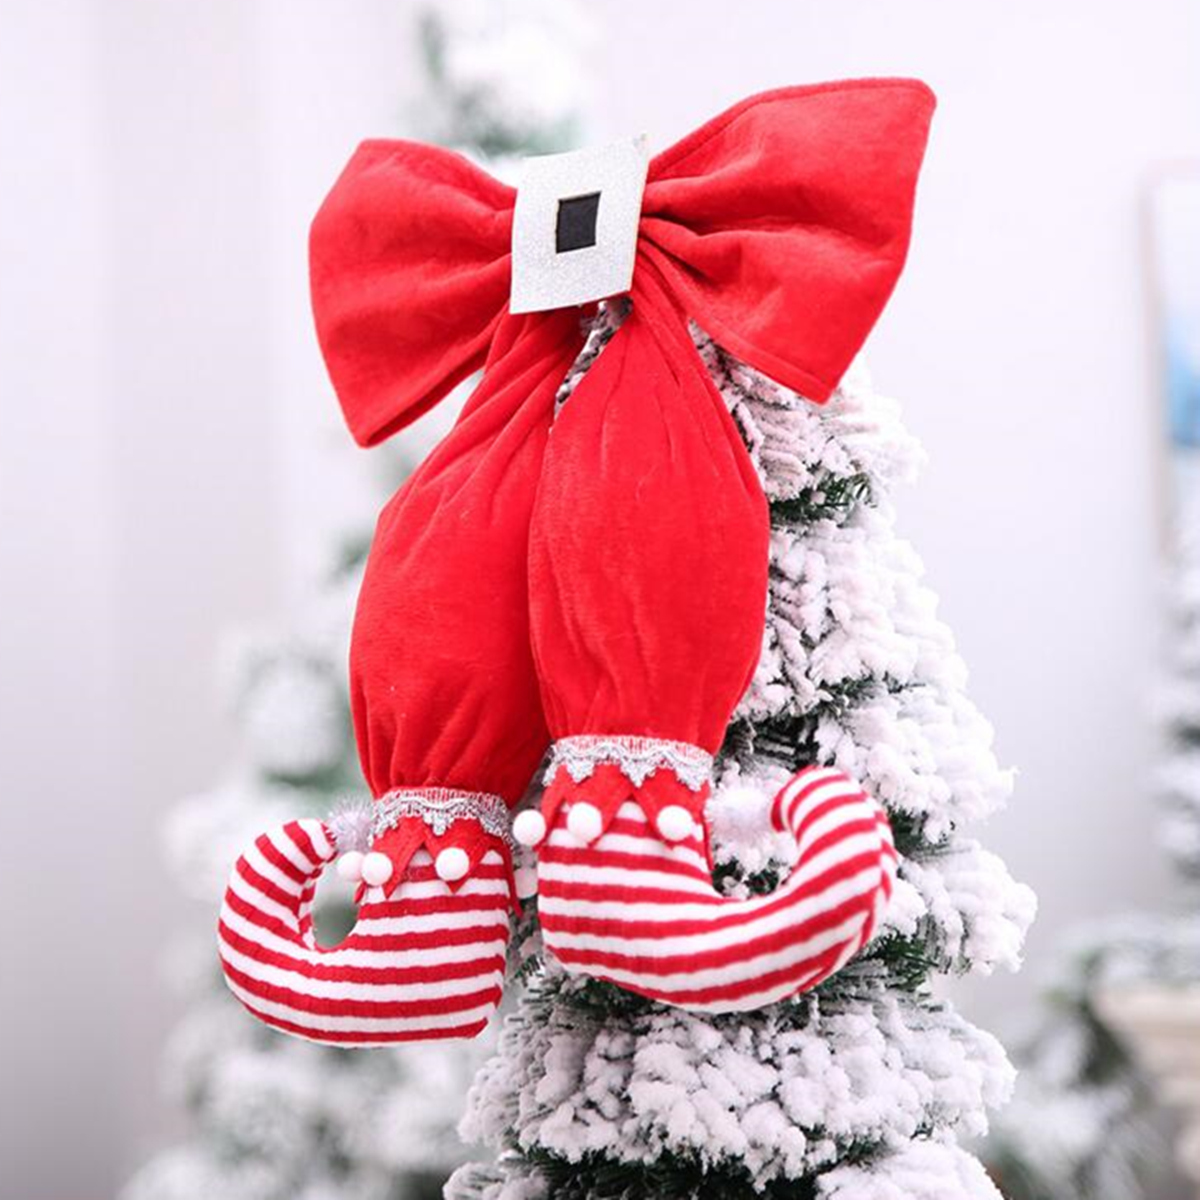 Christmas-Tree-Elf-Foot-Shape-Pendant-Party-Gifts-Home-Tree-Ornaments-Decorations-1360983-2